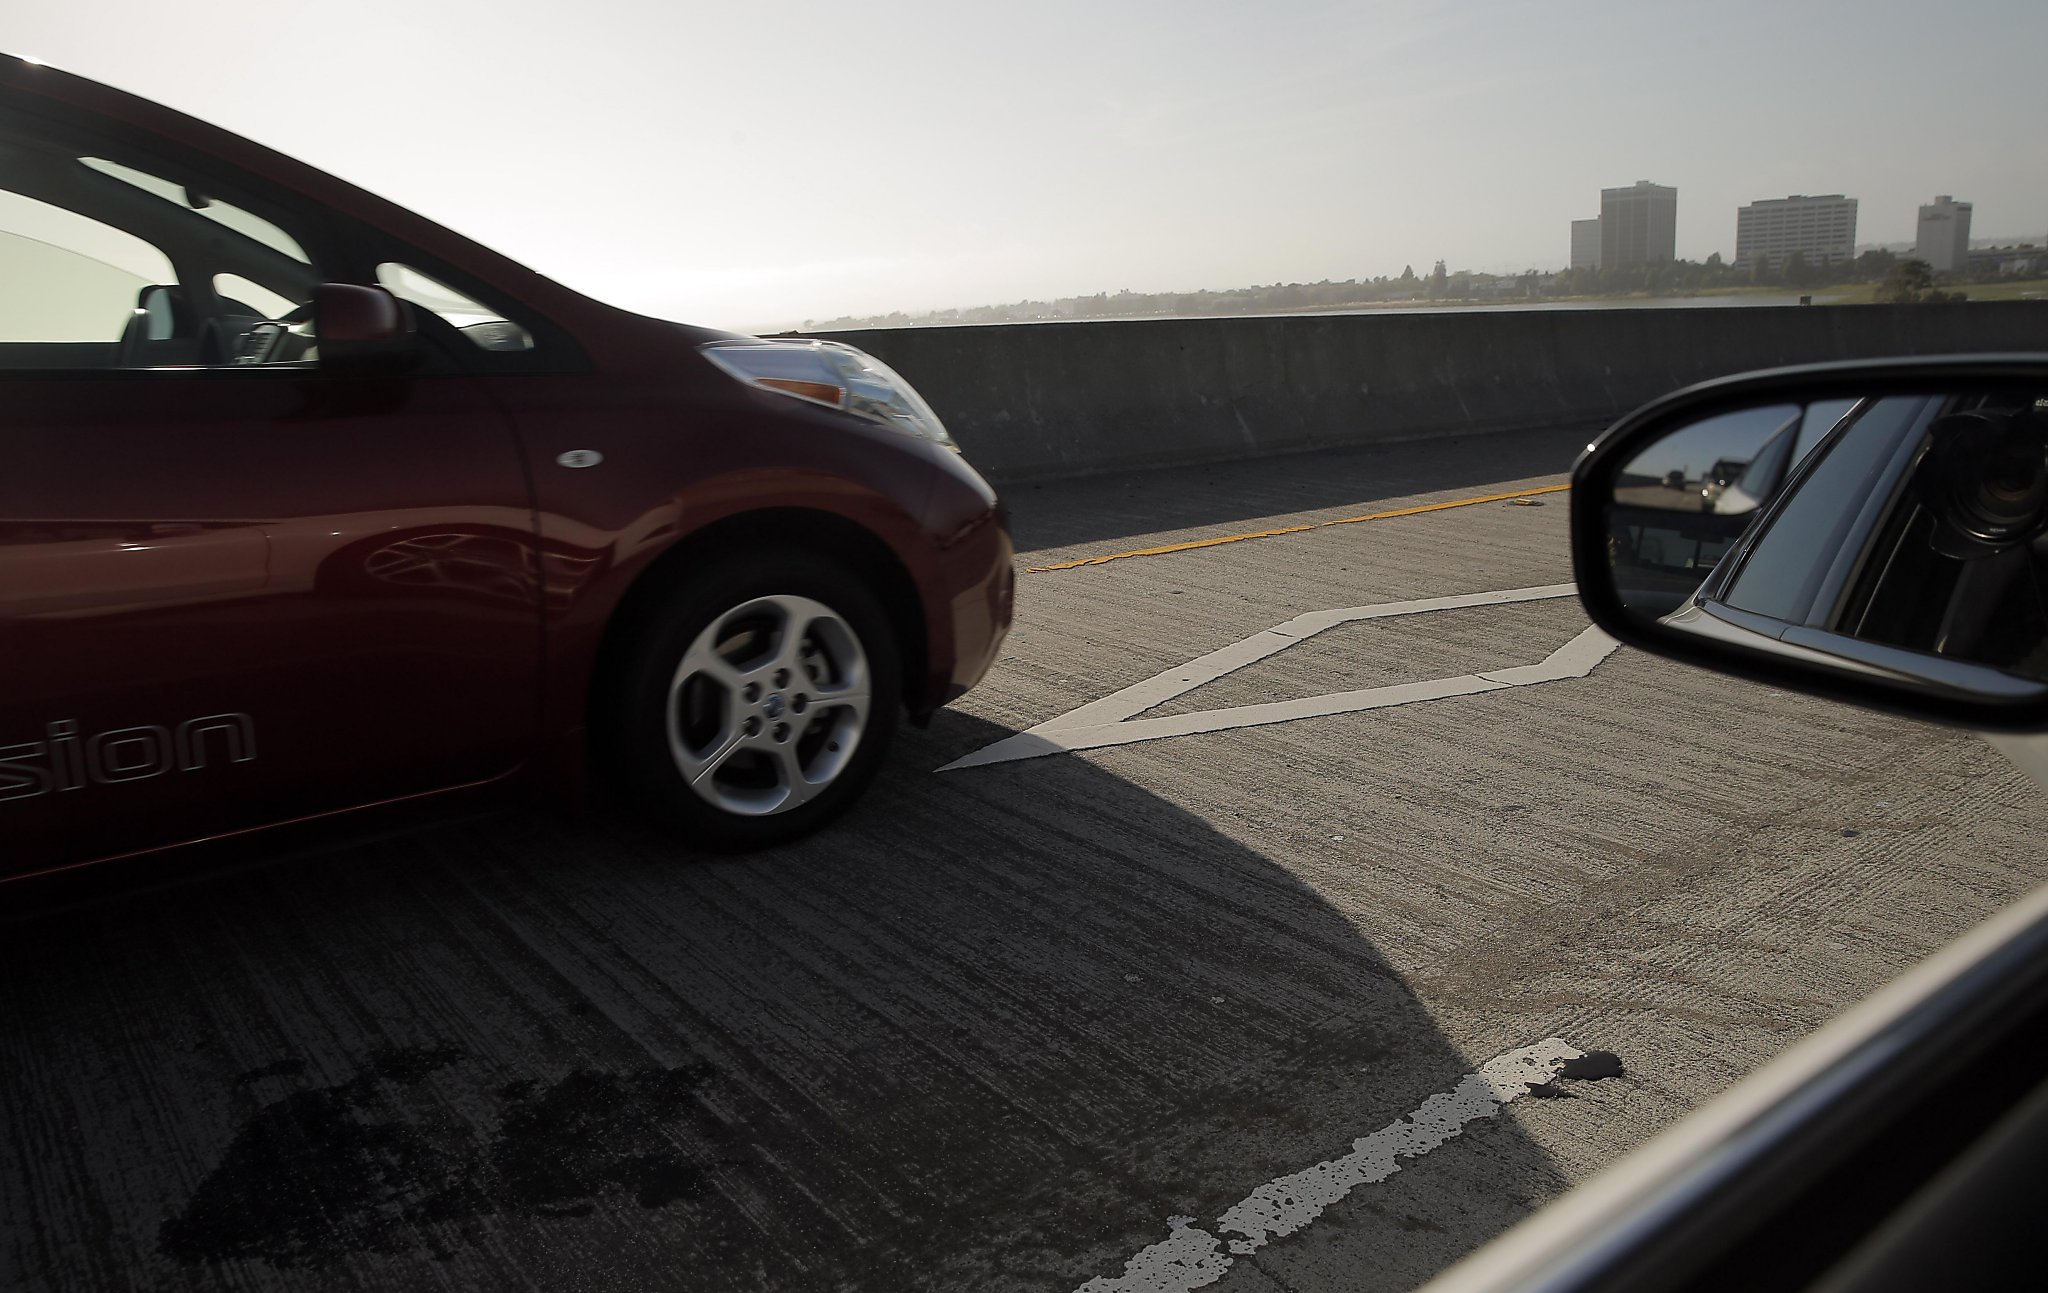 When California’s gas car ban takes effect, what happens to HOV